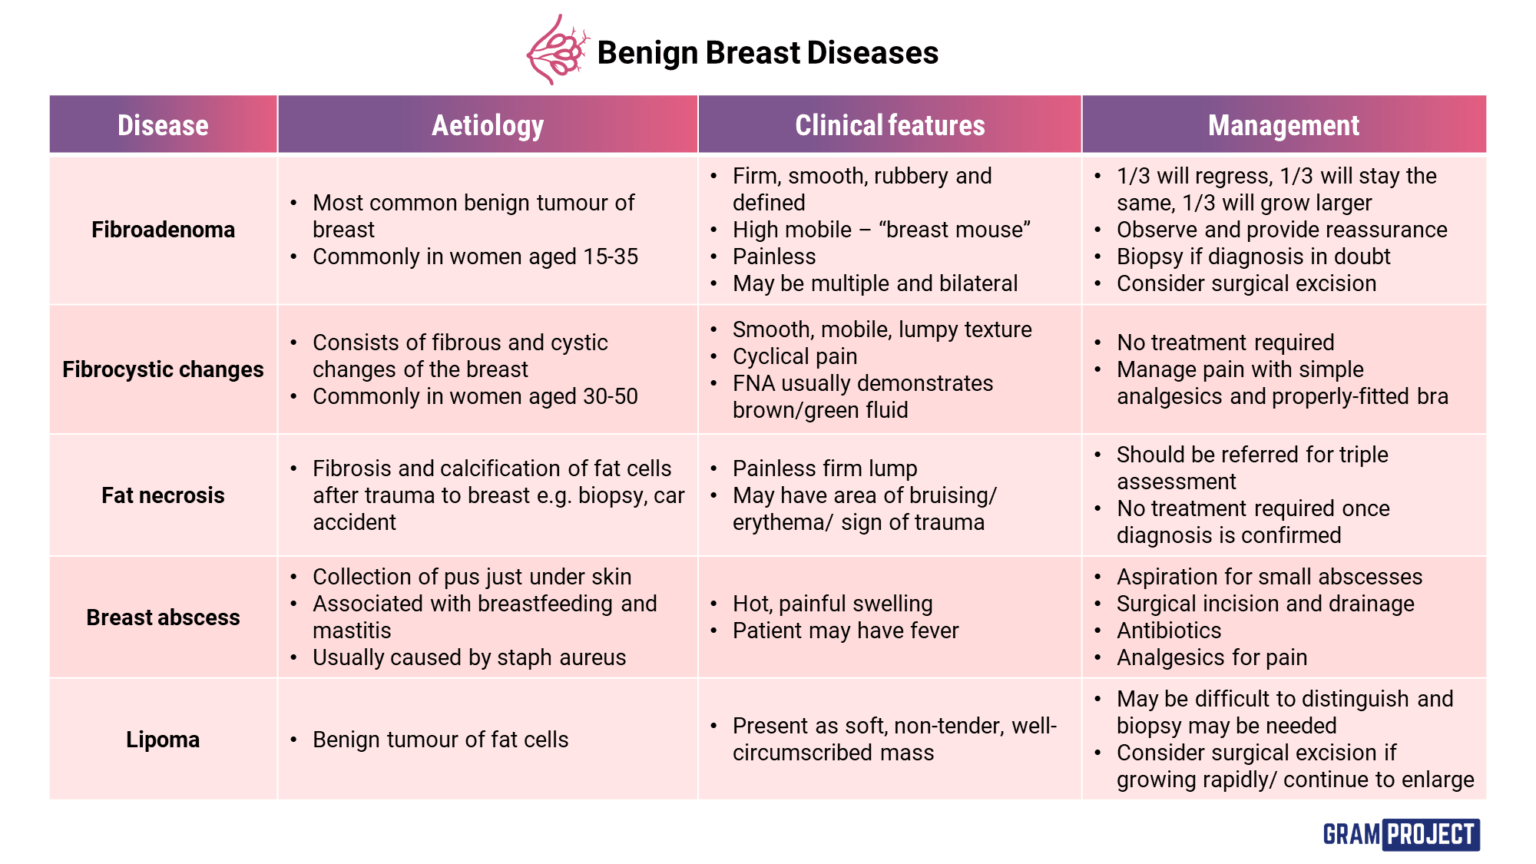 Table of benign breast diseases